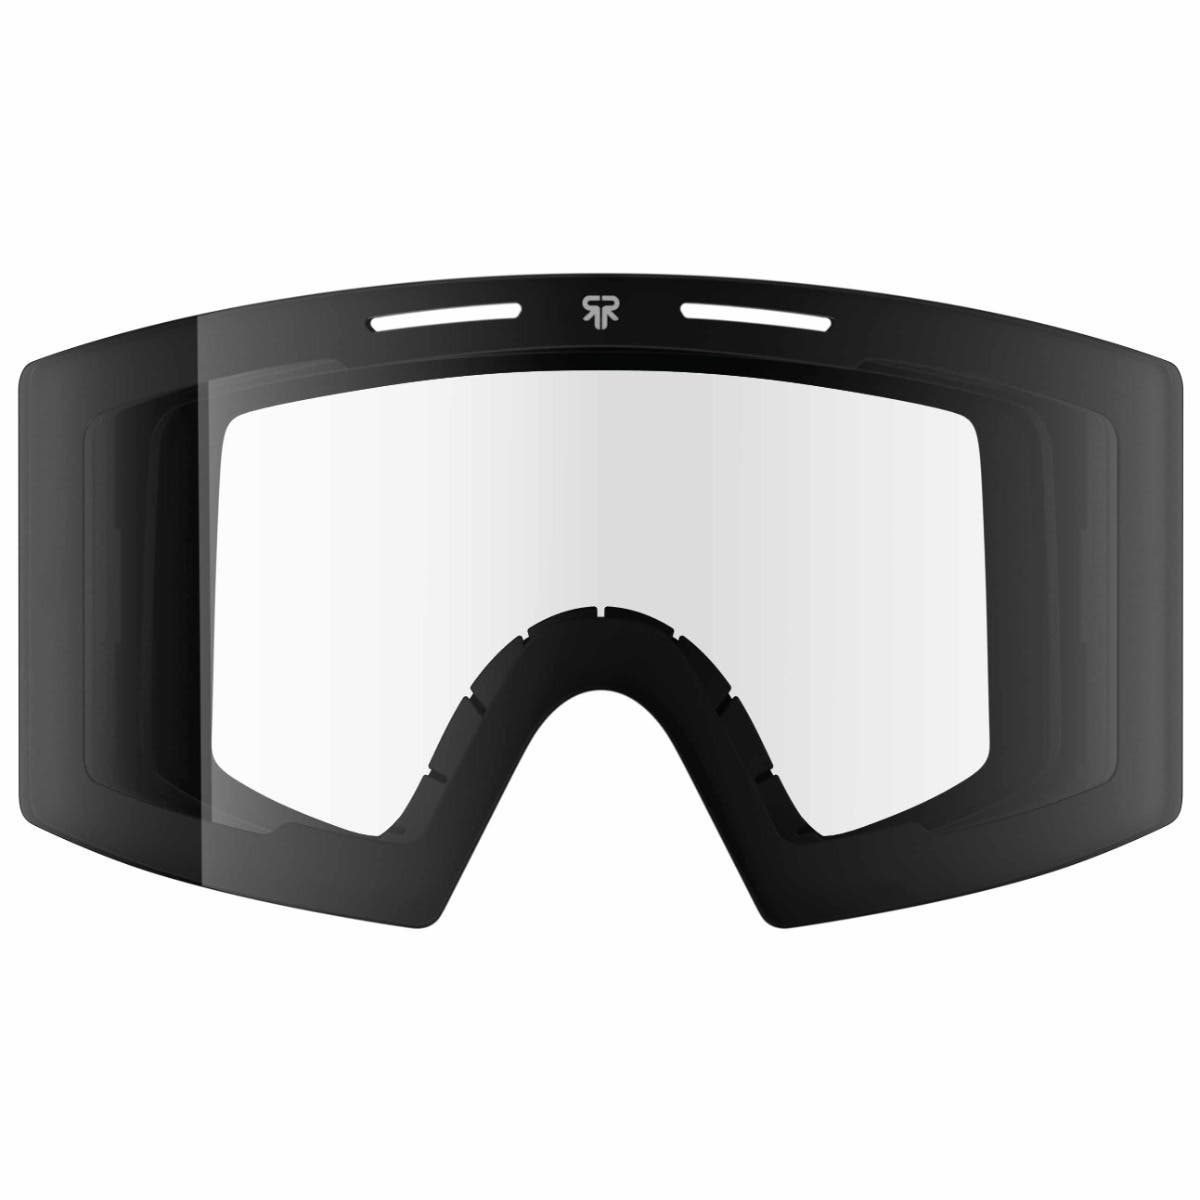 LITE Goggle Lens - Transition Clear / Smoke